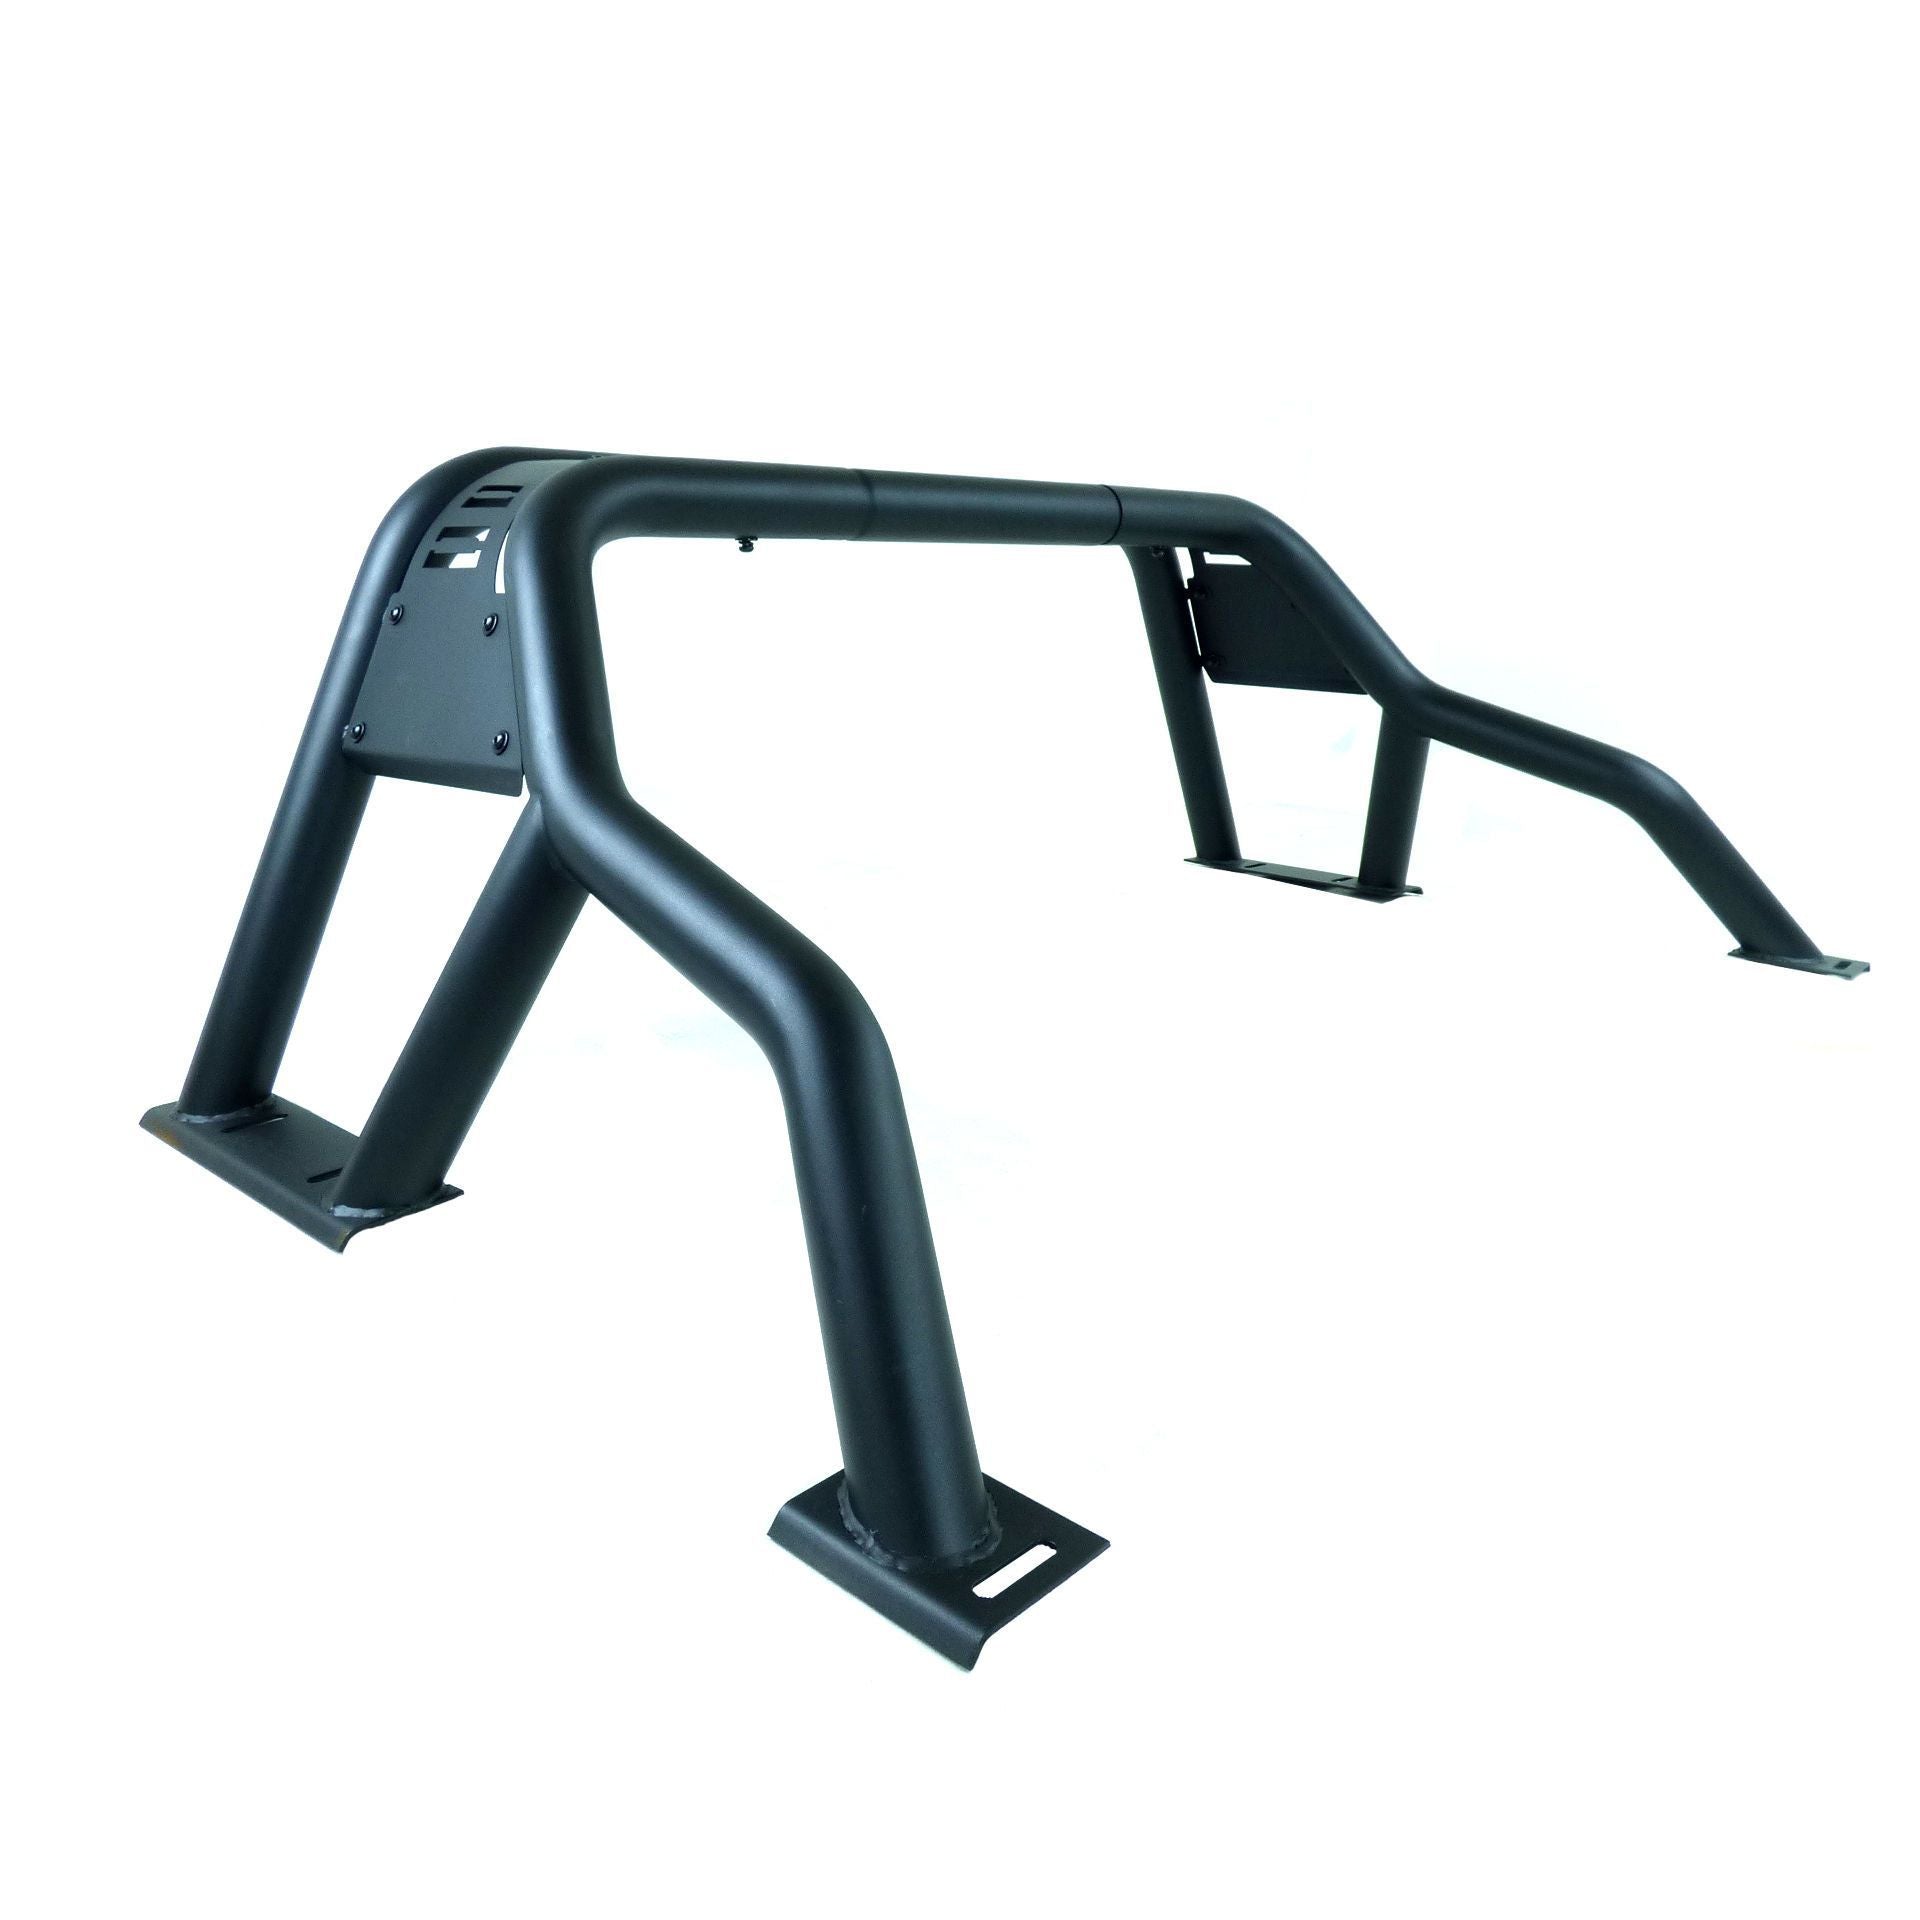 Black SUS201 Short Arm Roll Sports Bar for the Isuzu D-Max 2012-2020 -  - sold by Direct4x4